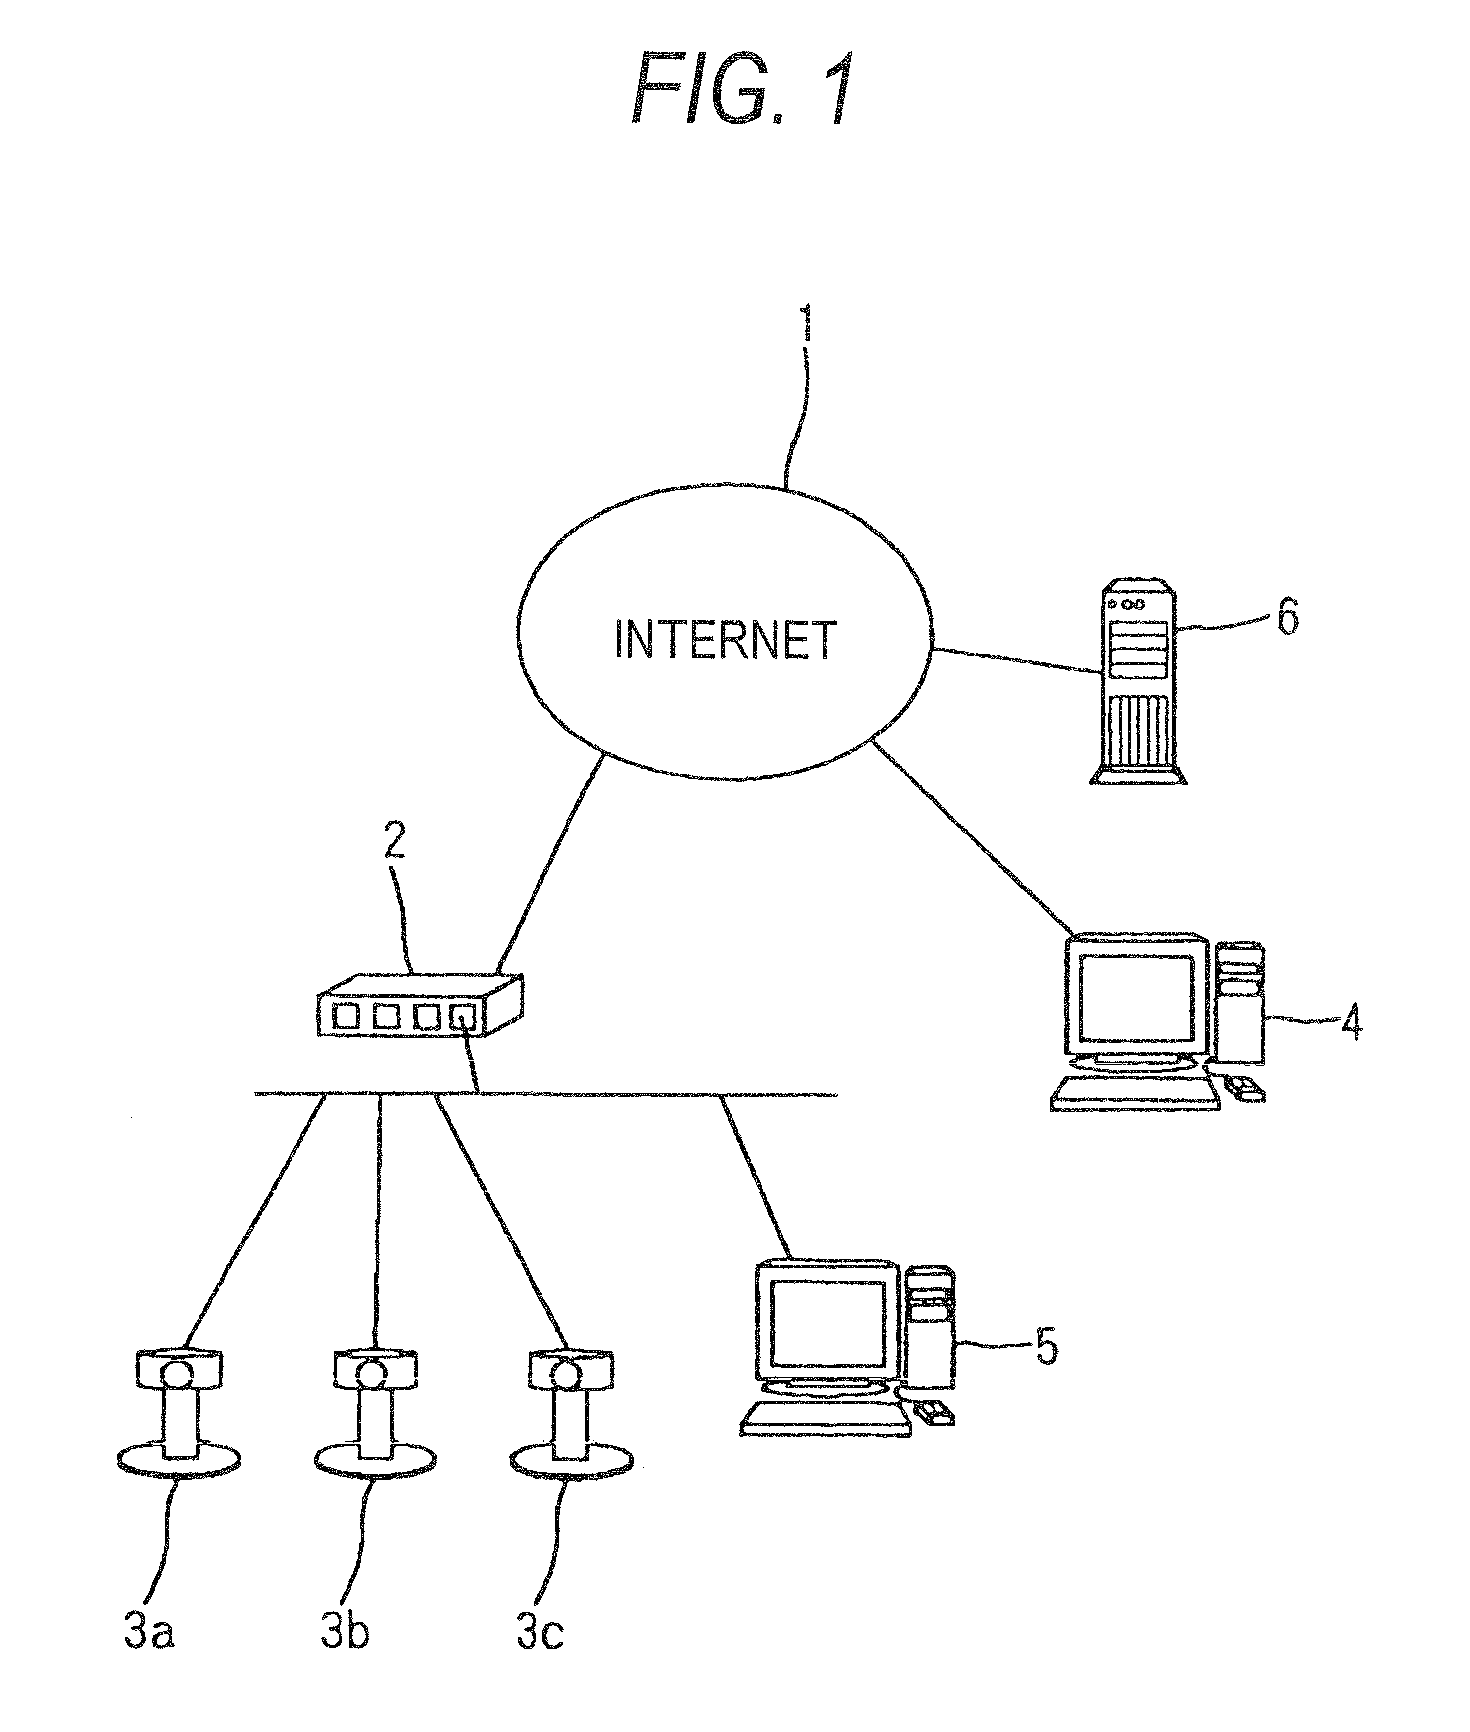 IP device, management server, and network system